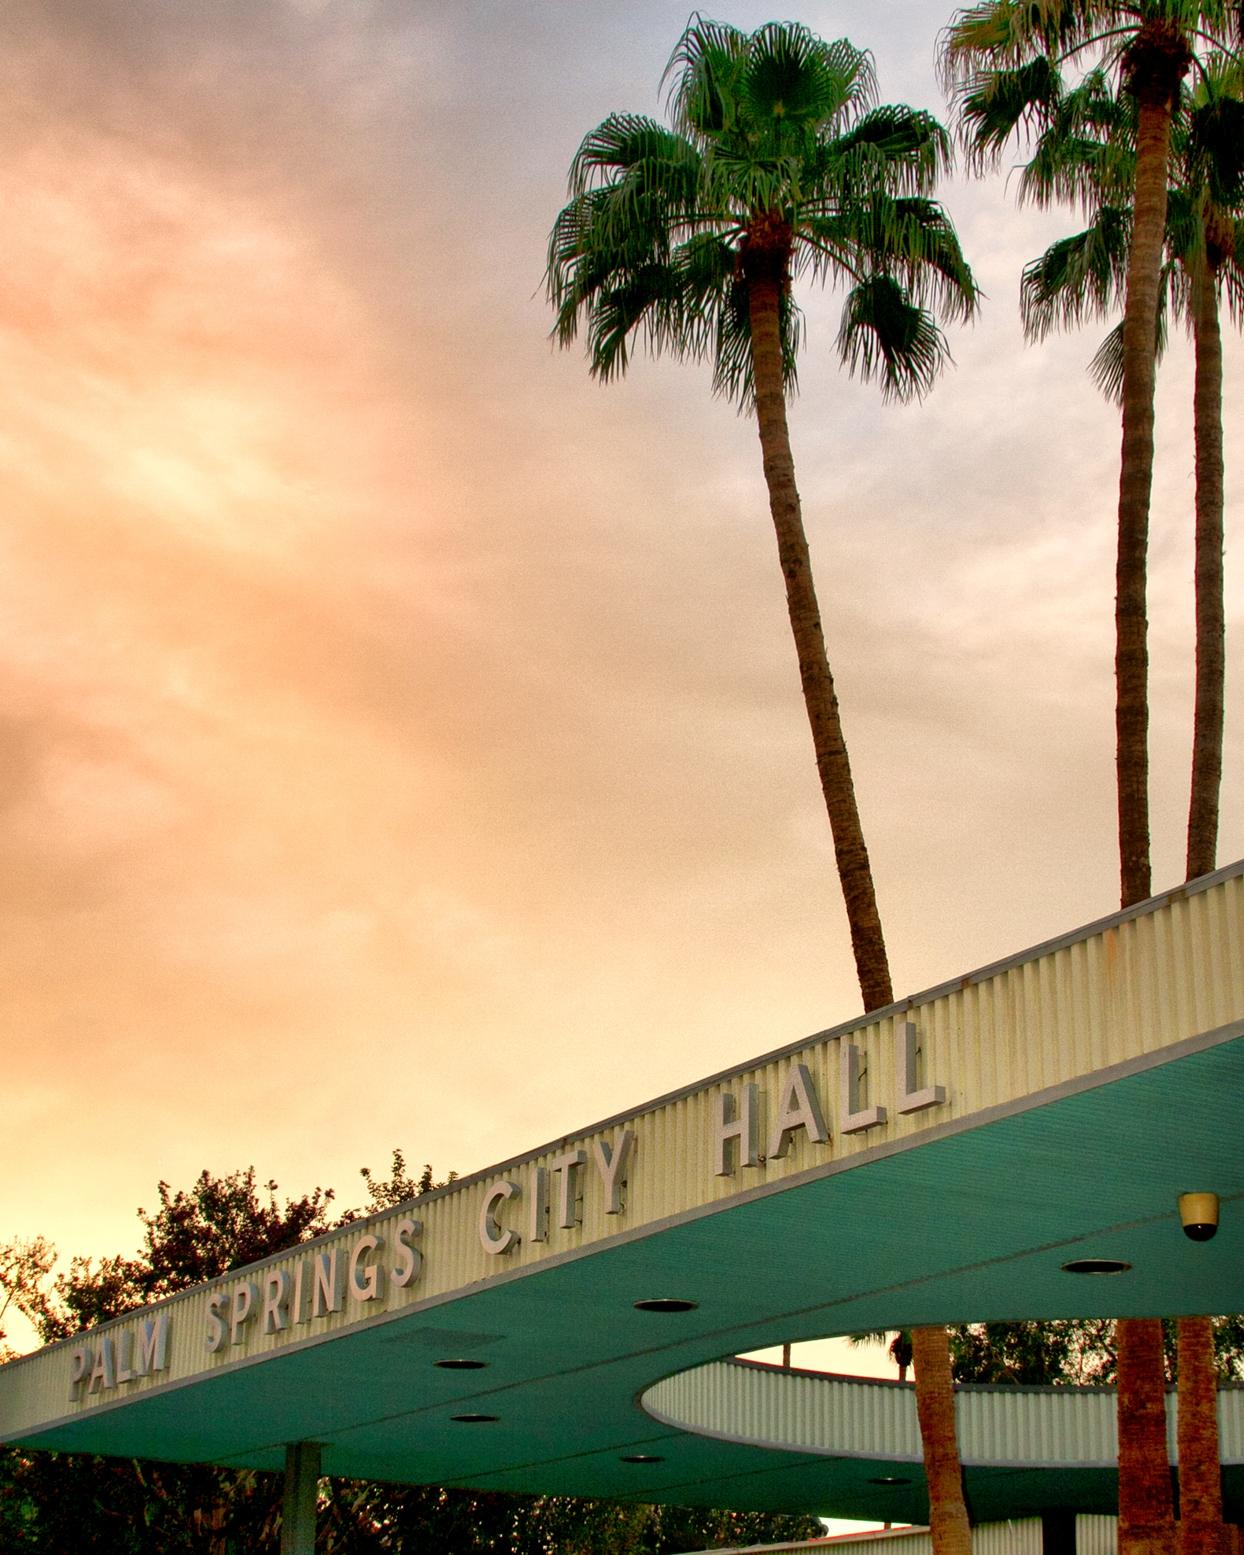 William Dey Color Photograph - CITY HALL SKY Palm Springs, Photograph, Archival Ink Jet